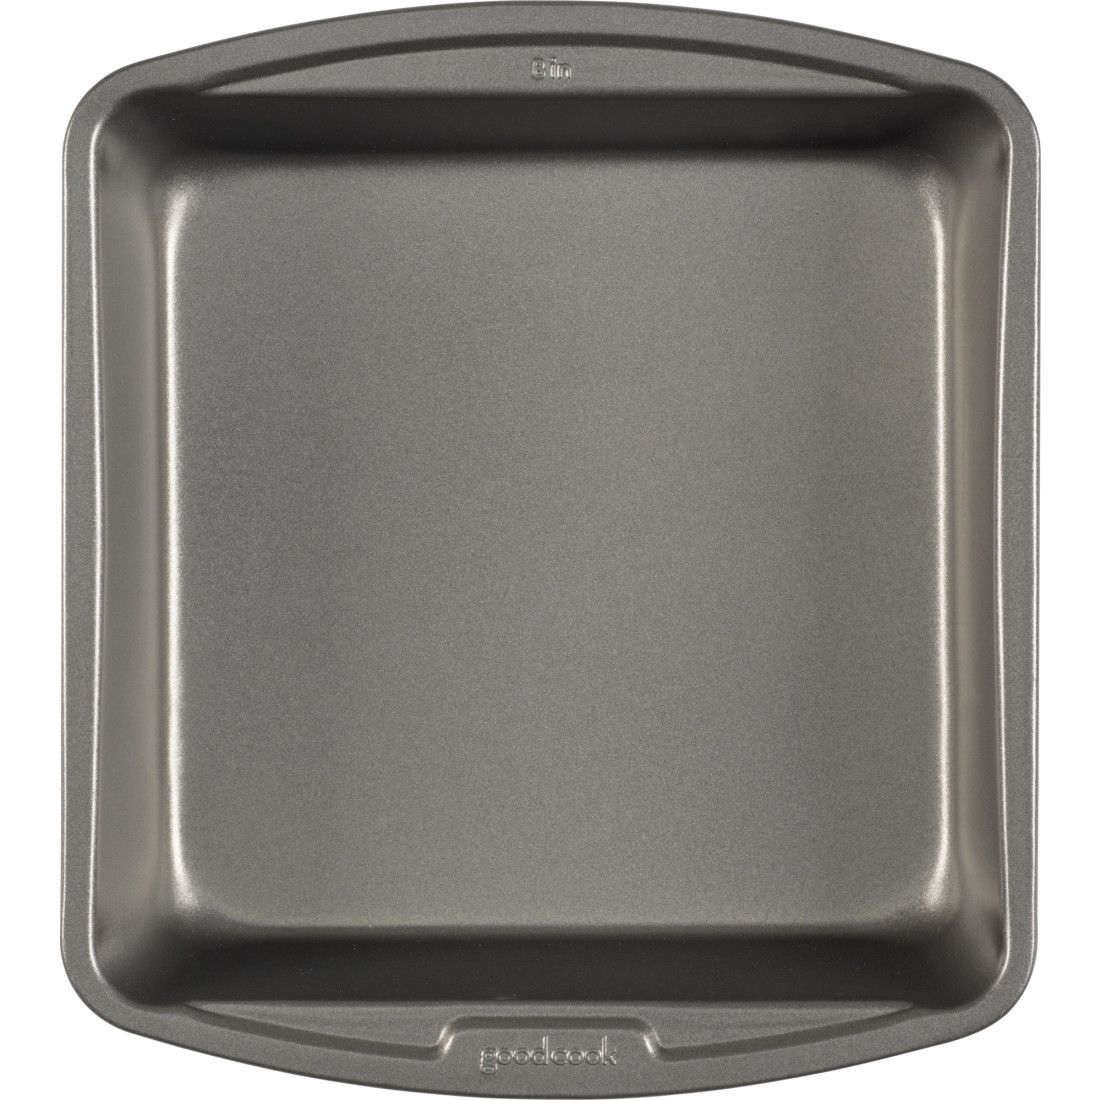 Good Cook 8 Inch x 8 Inch Square Cake Pan, 8 x 8 Inch, Grey, 6 Pack